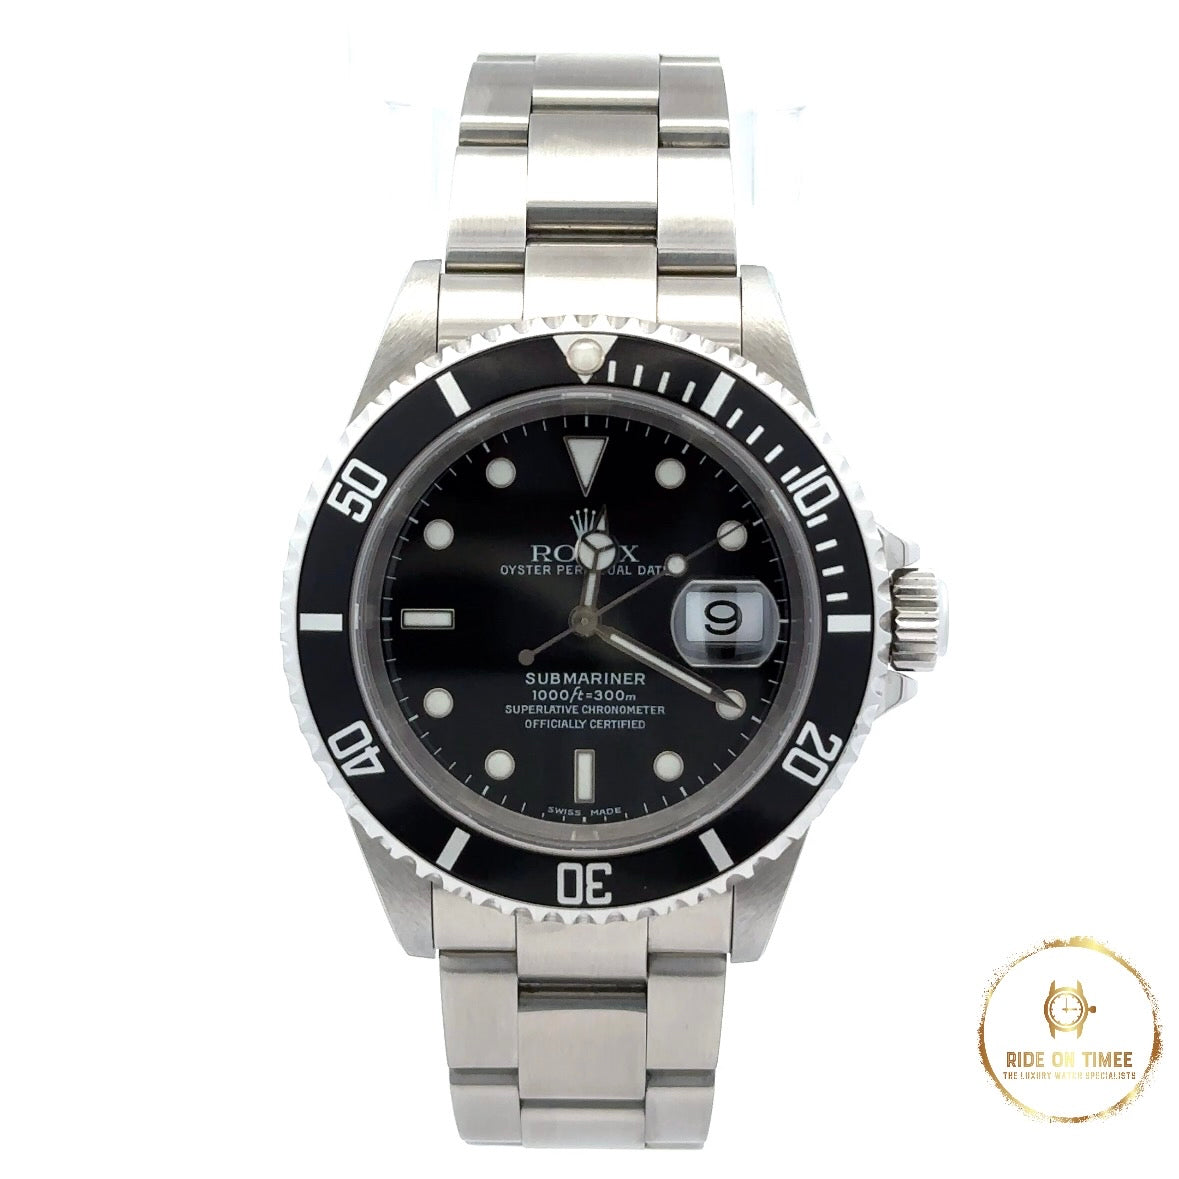 Rolex Submariner Date 40mm ‘16610LN’ - Ride On Timee